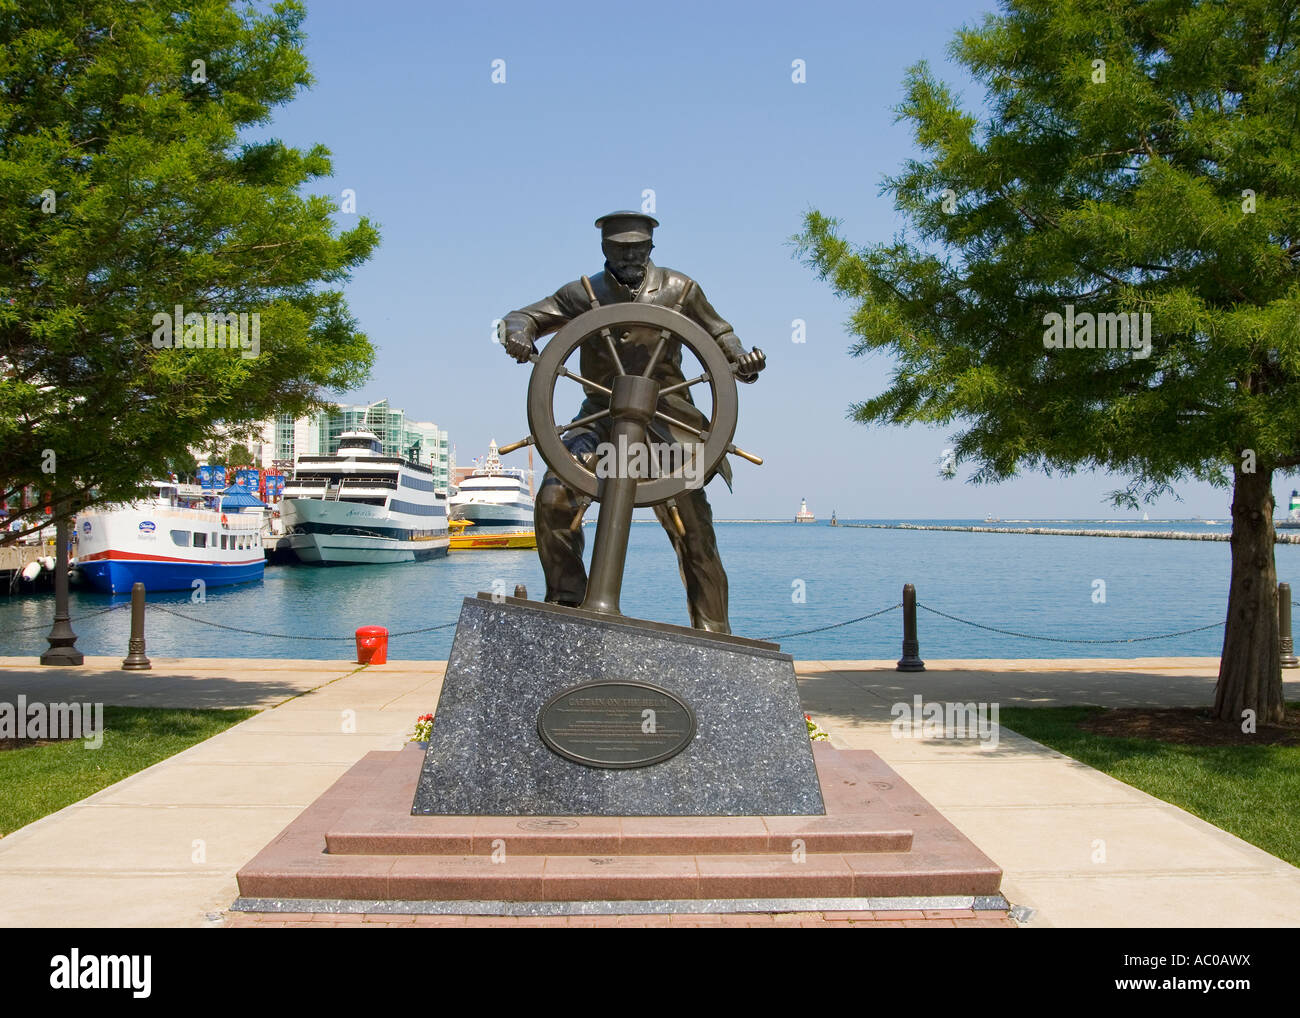 It's time for a statue Maritime-statue-AC0AWX